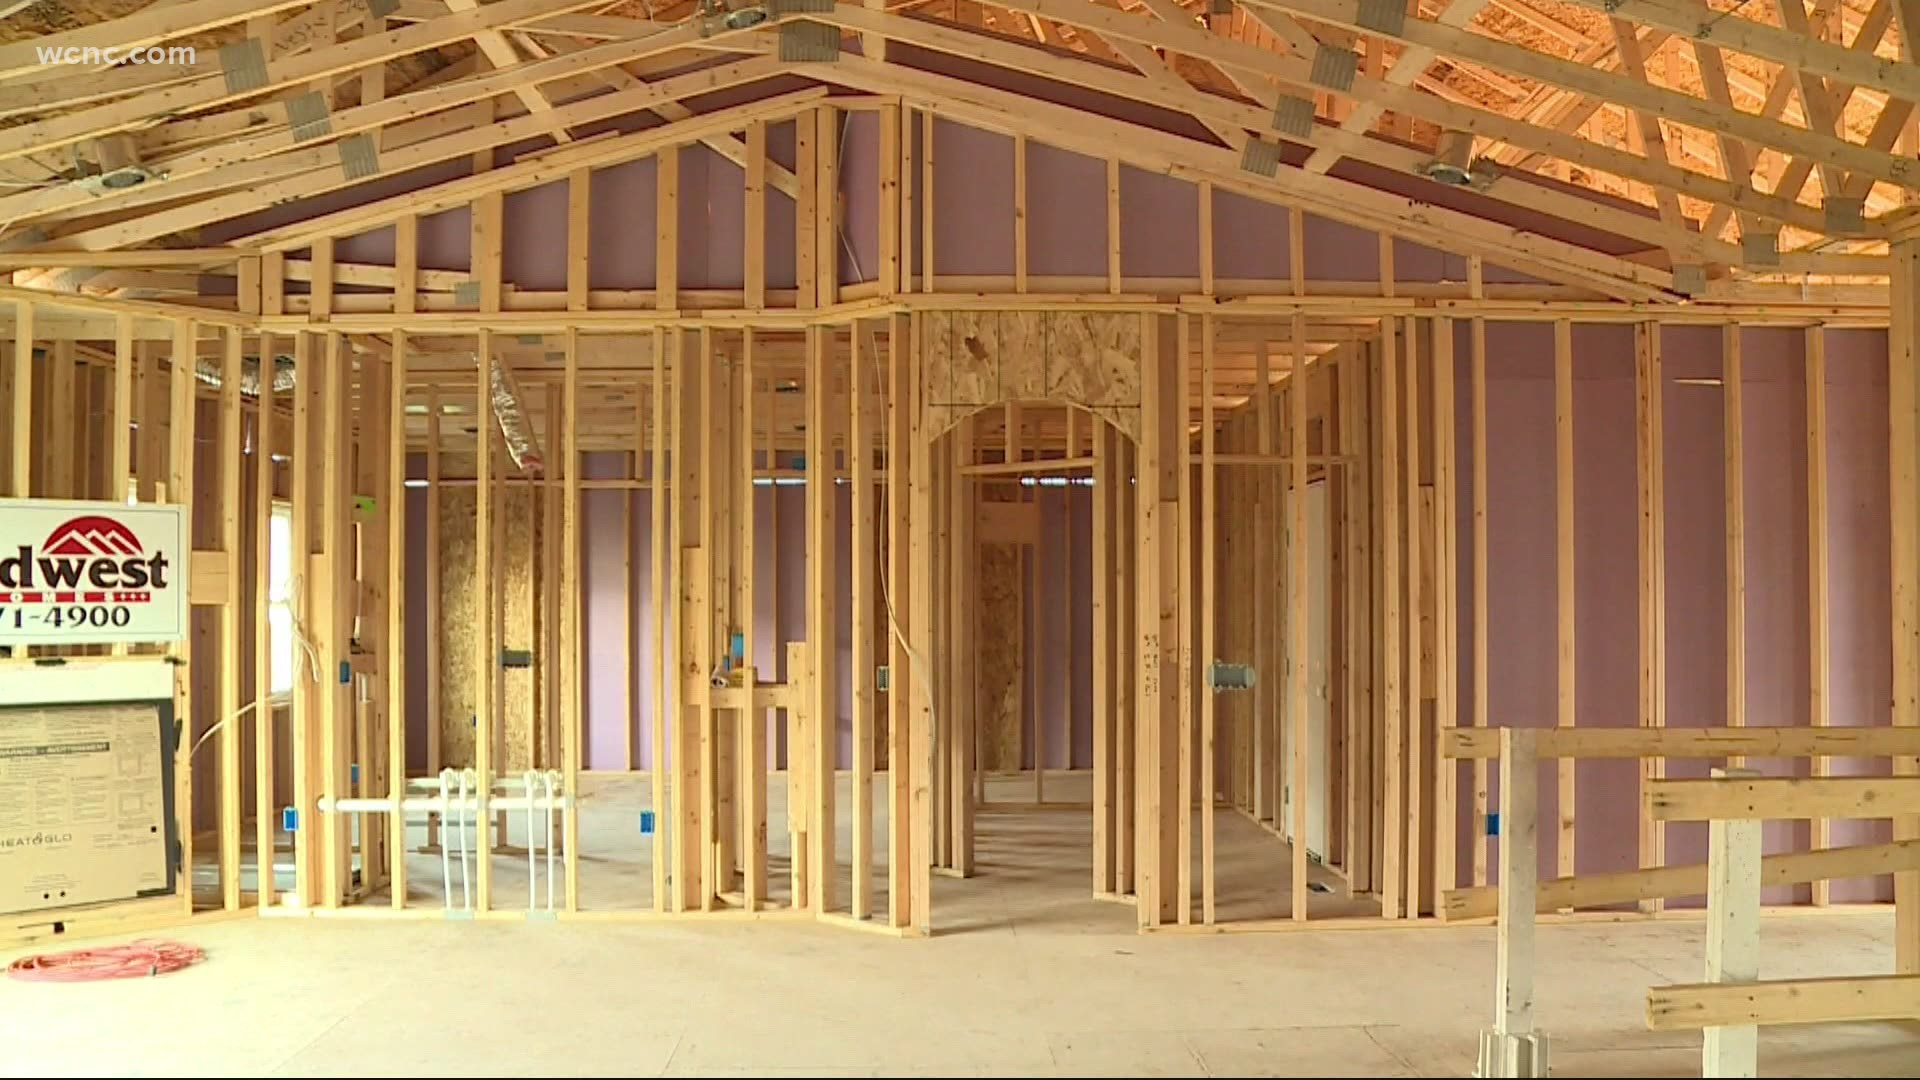 We talk with a family from our area that had to put their new home on hold due to lumber disappearing.